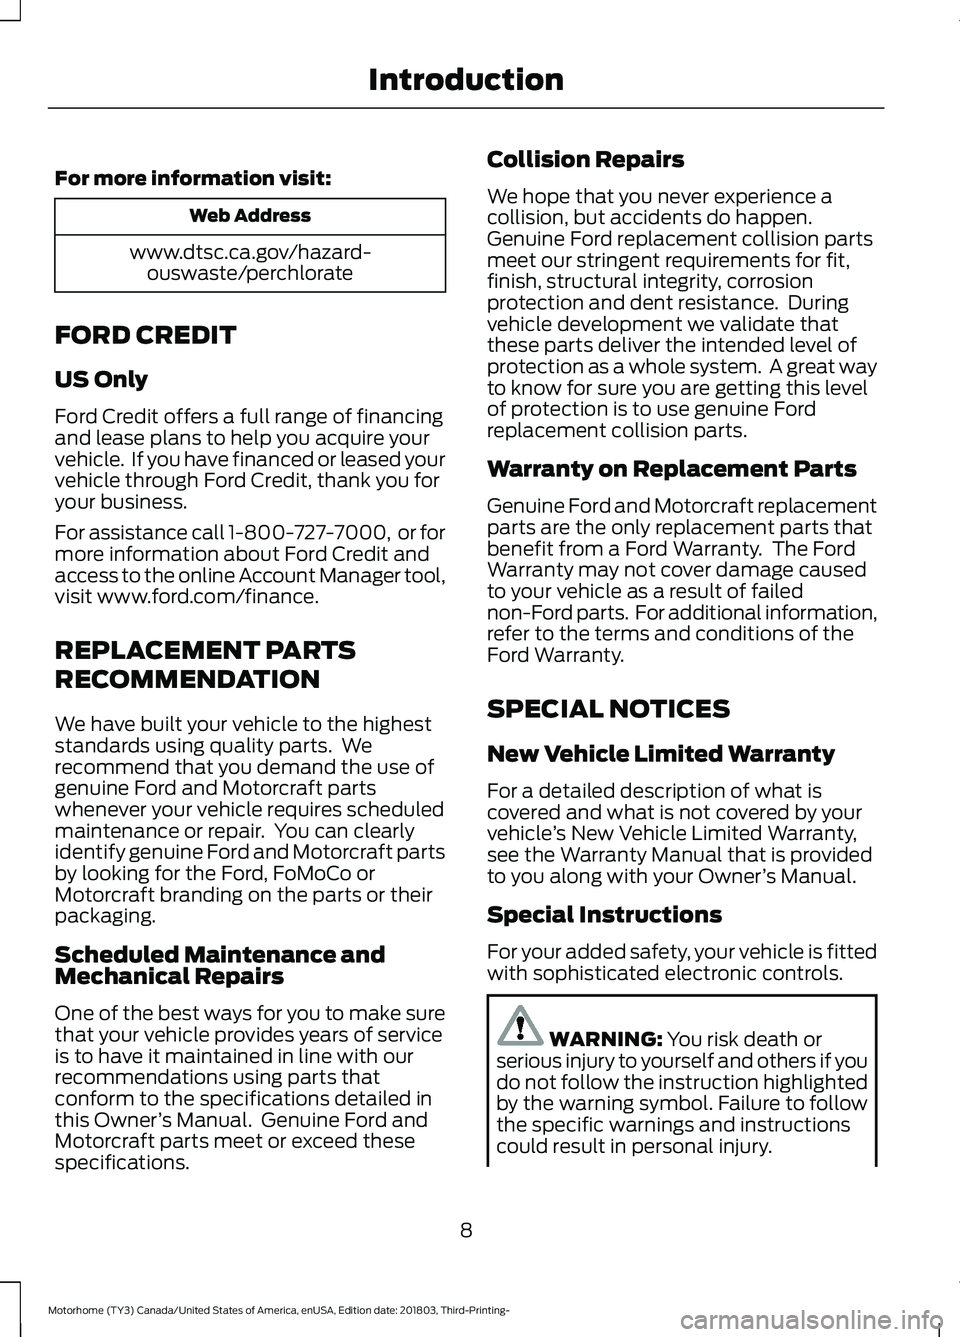 FORD F-59 2019  Owners Manual For more information visit:
Web Address
www.dtsc.ca.gov/hazard-ouswaste/perchlorate
FORD CREDIT
US Only
Ford Credit offers a full range of financingand lease plans to help you acquire yourvehicle.  If